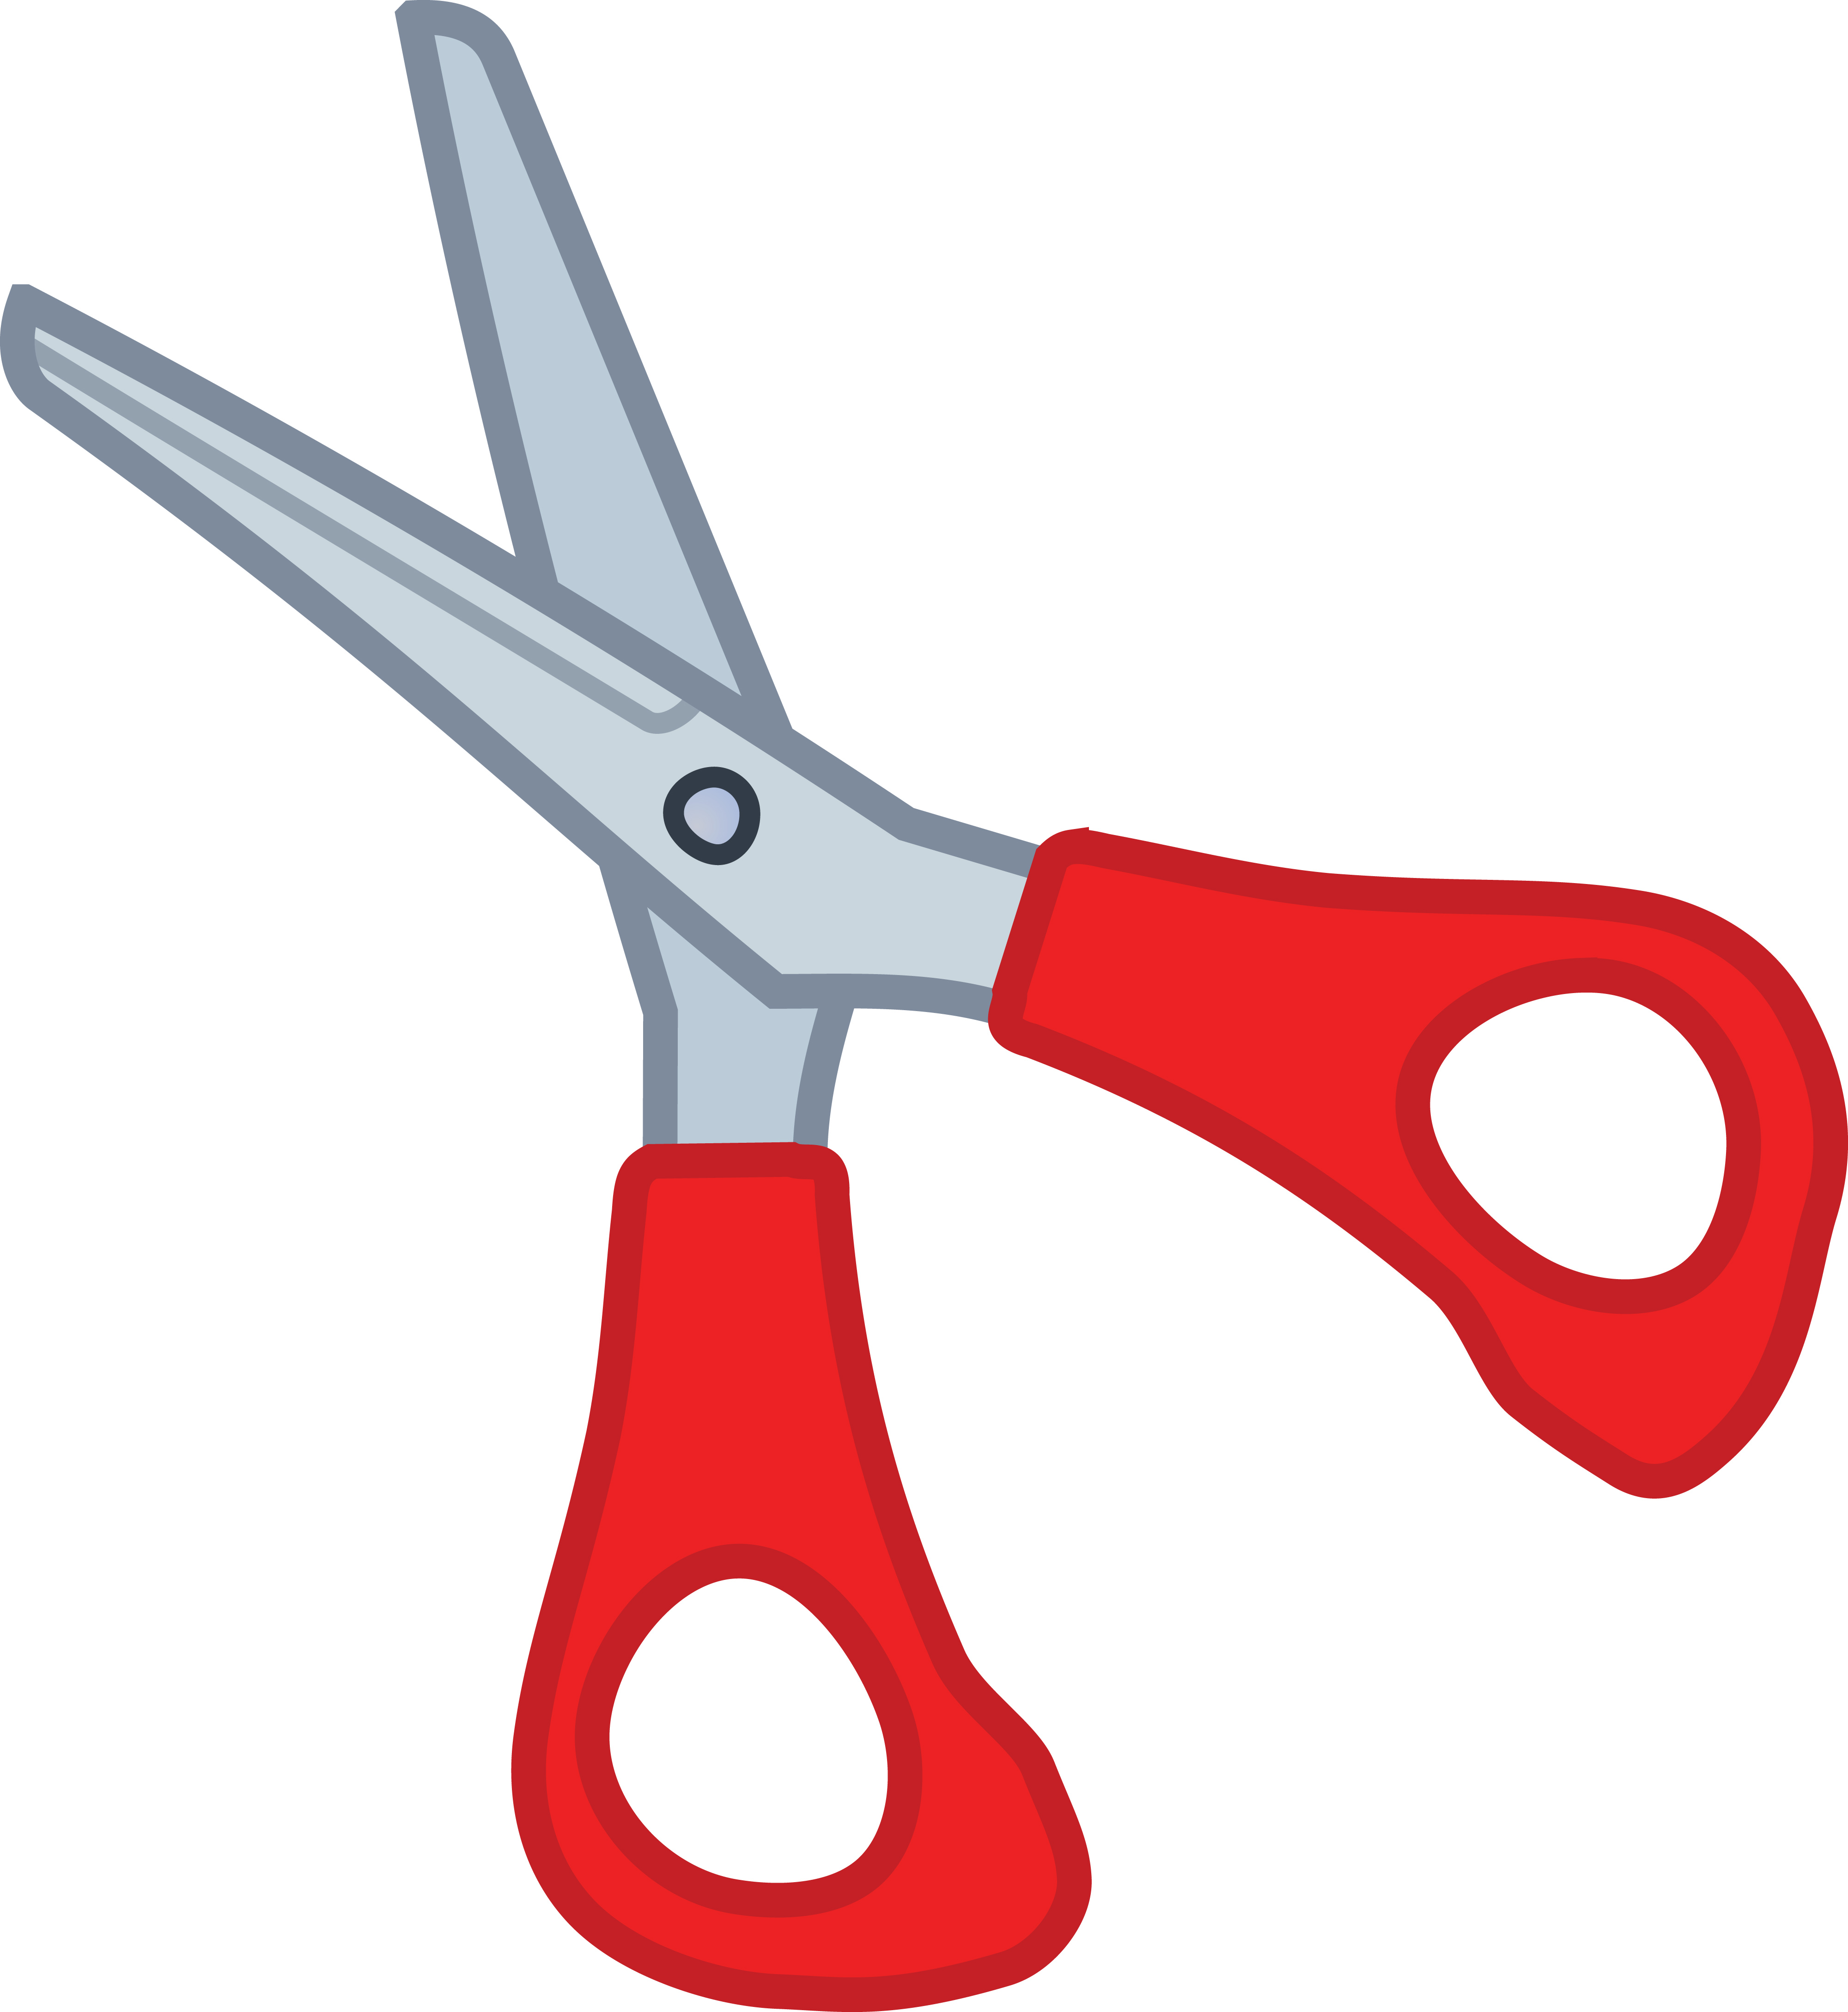 1702 Free Clipart Of A Pair Of Scissors 